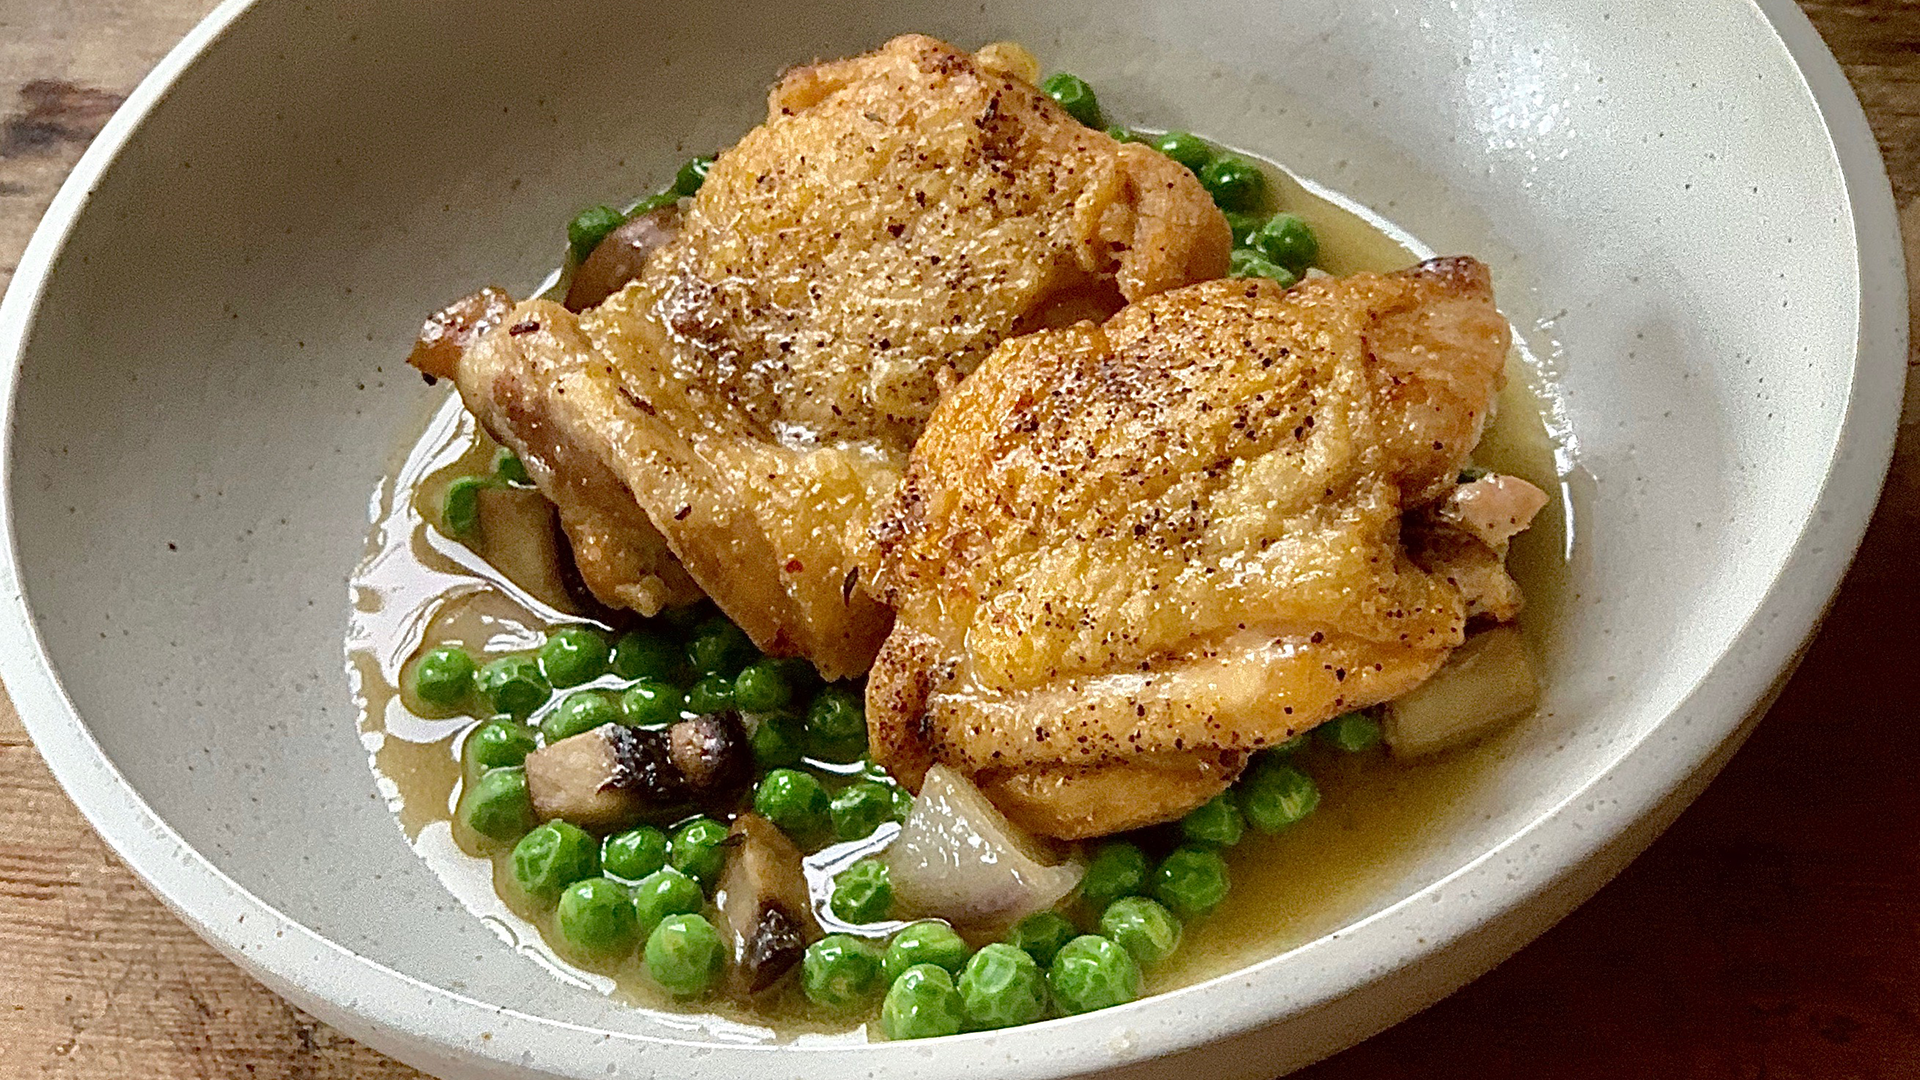 Braised chicken with spring peas and onions